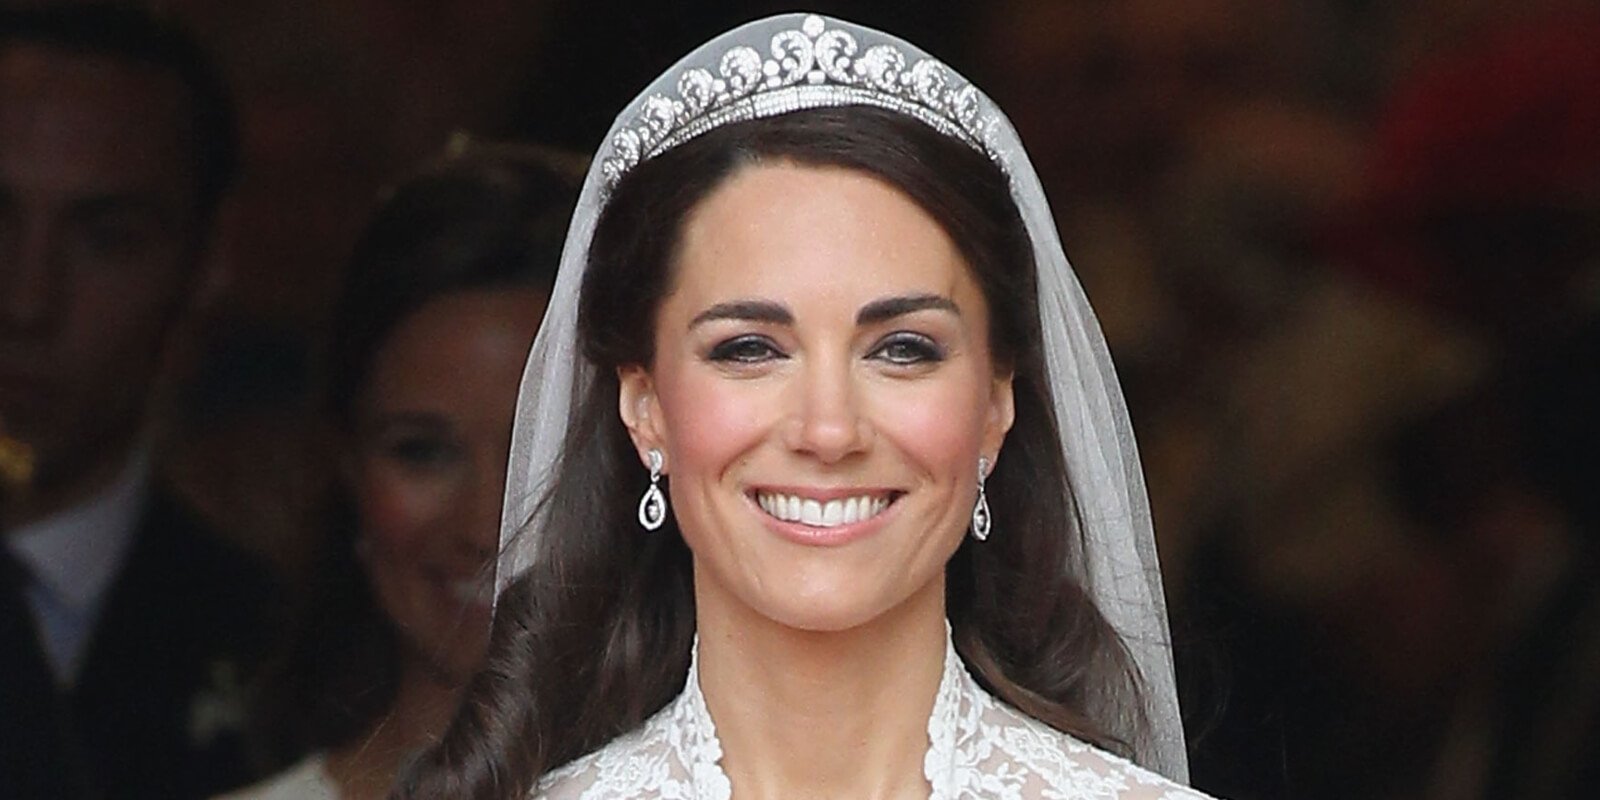 Kate Middleton wears a Cartier Halo Tiara on her wedding day to Prince William in 2011.